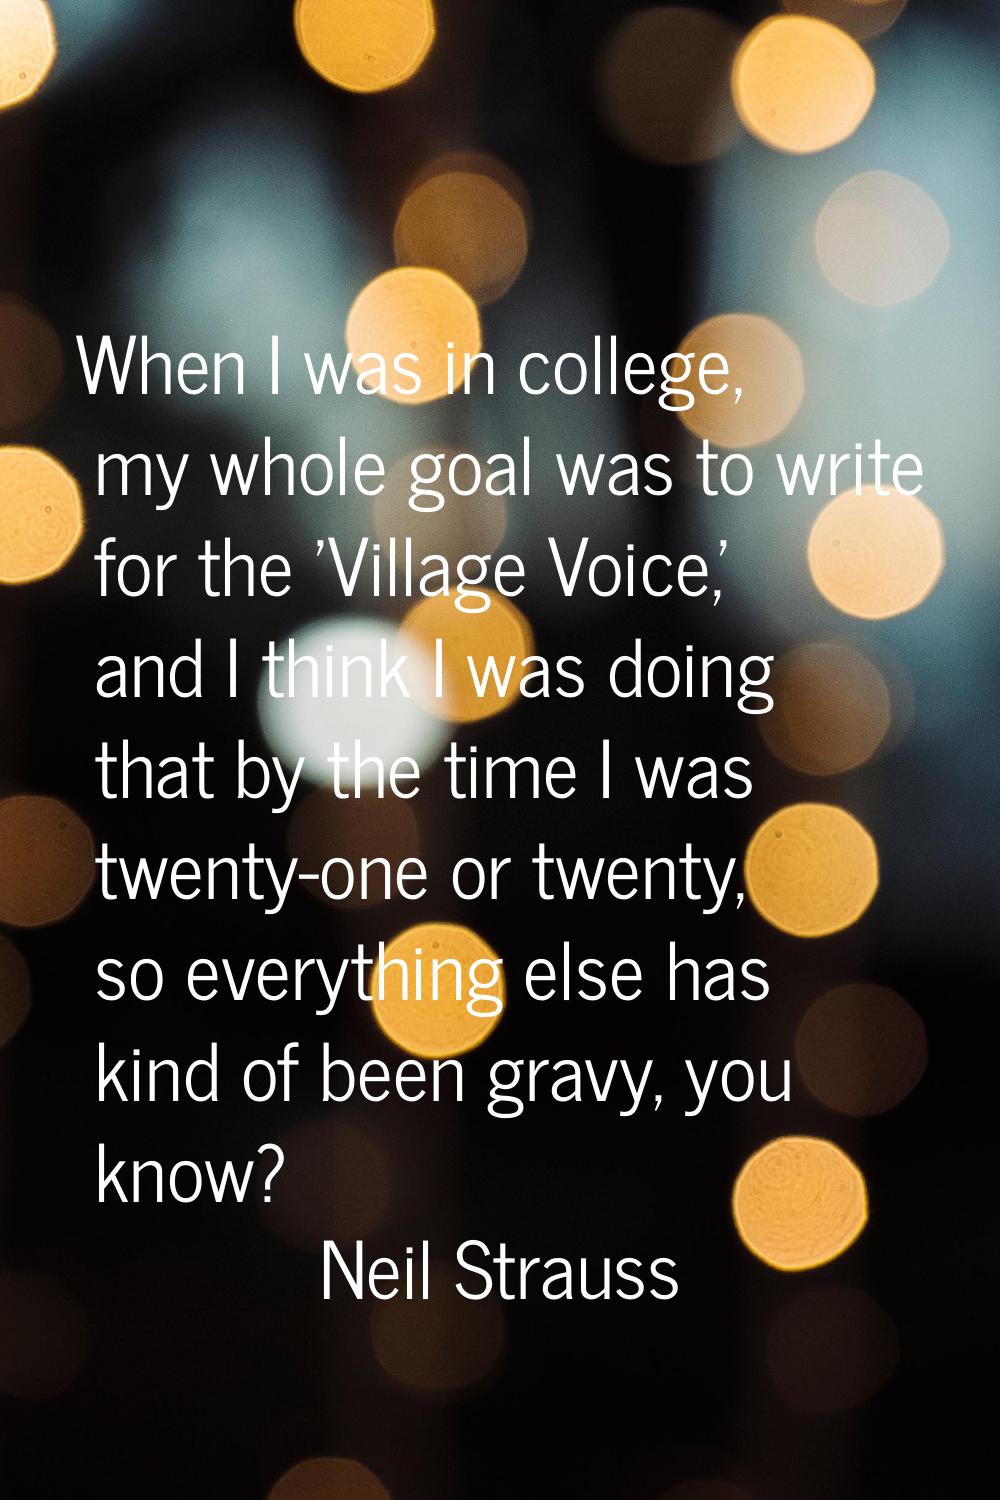 When I was in college, my whole goal was to write for the 'Village Voice,' and I think I was doing 